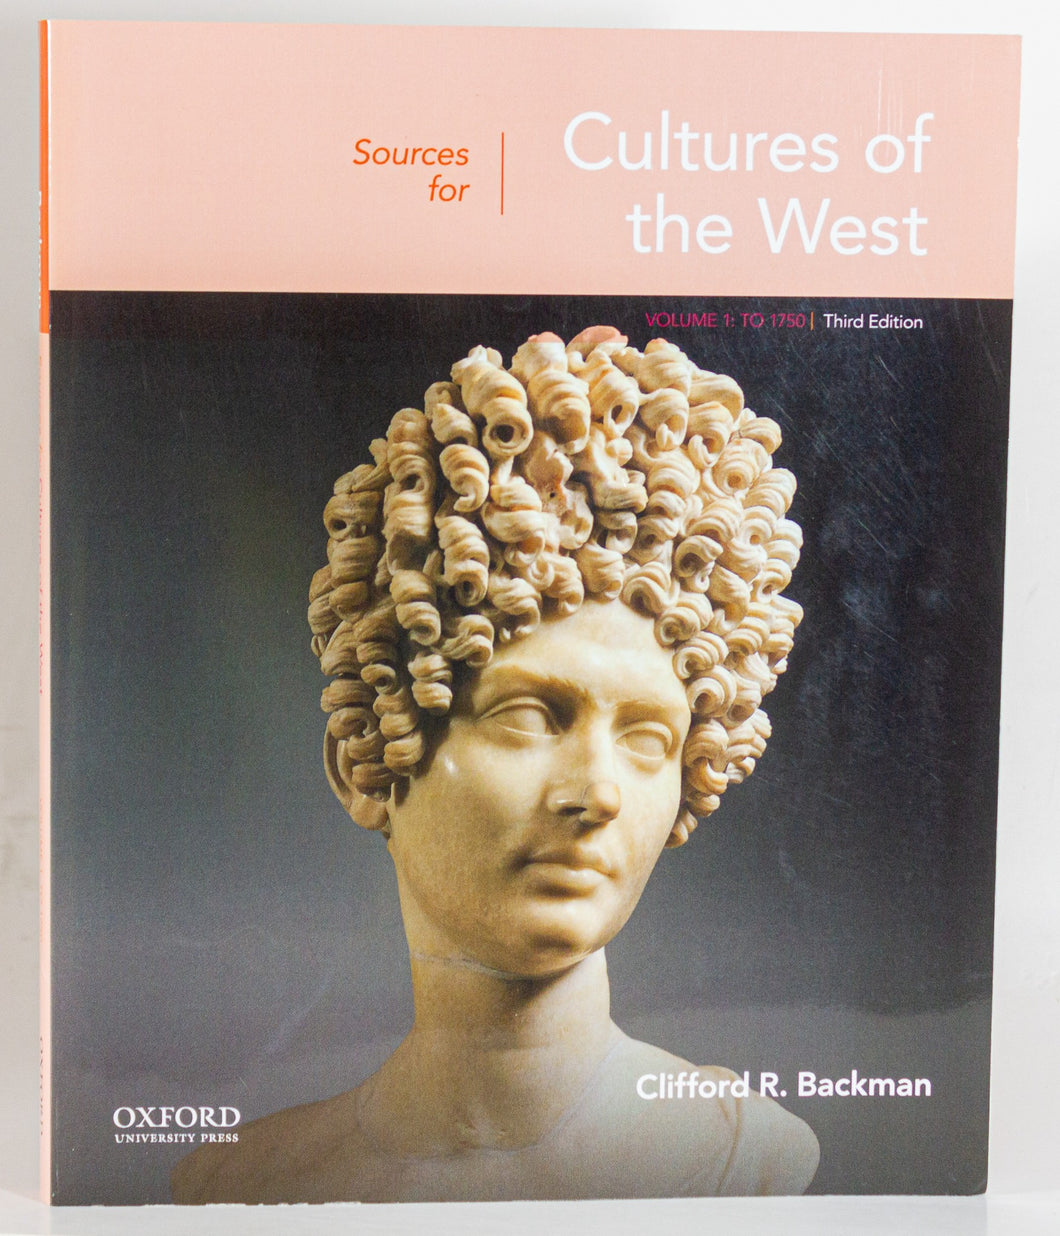 Sources for Cultures of the West Volume 1 To 1750 by Clifford R Backman Textbook